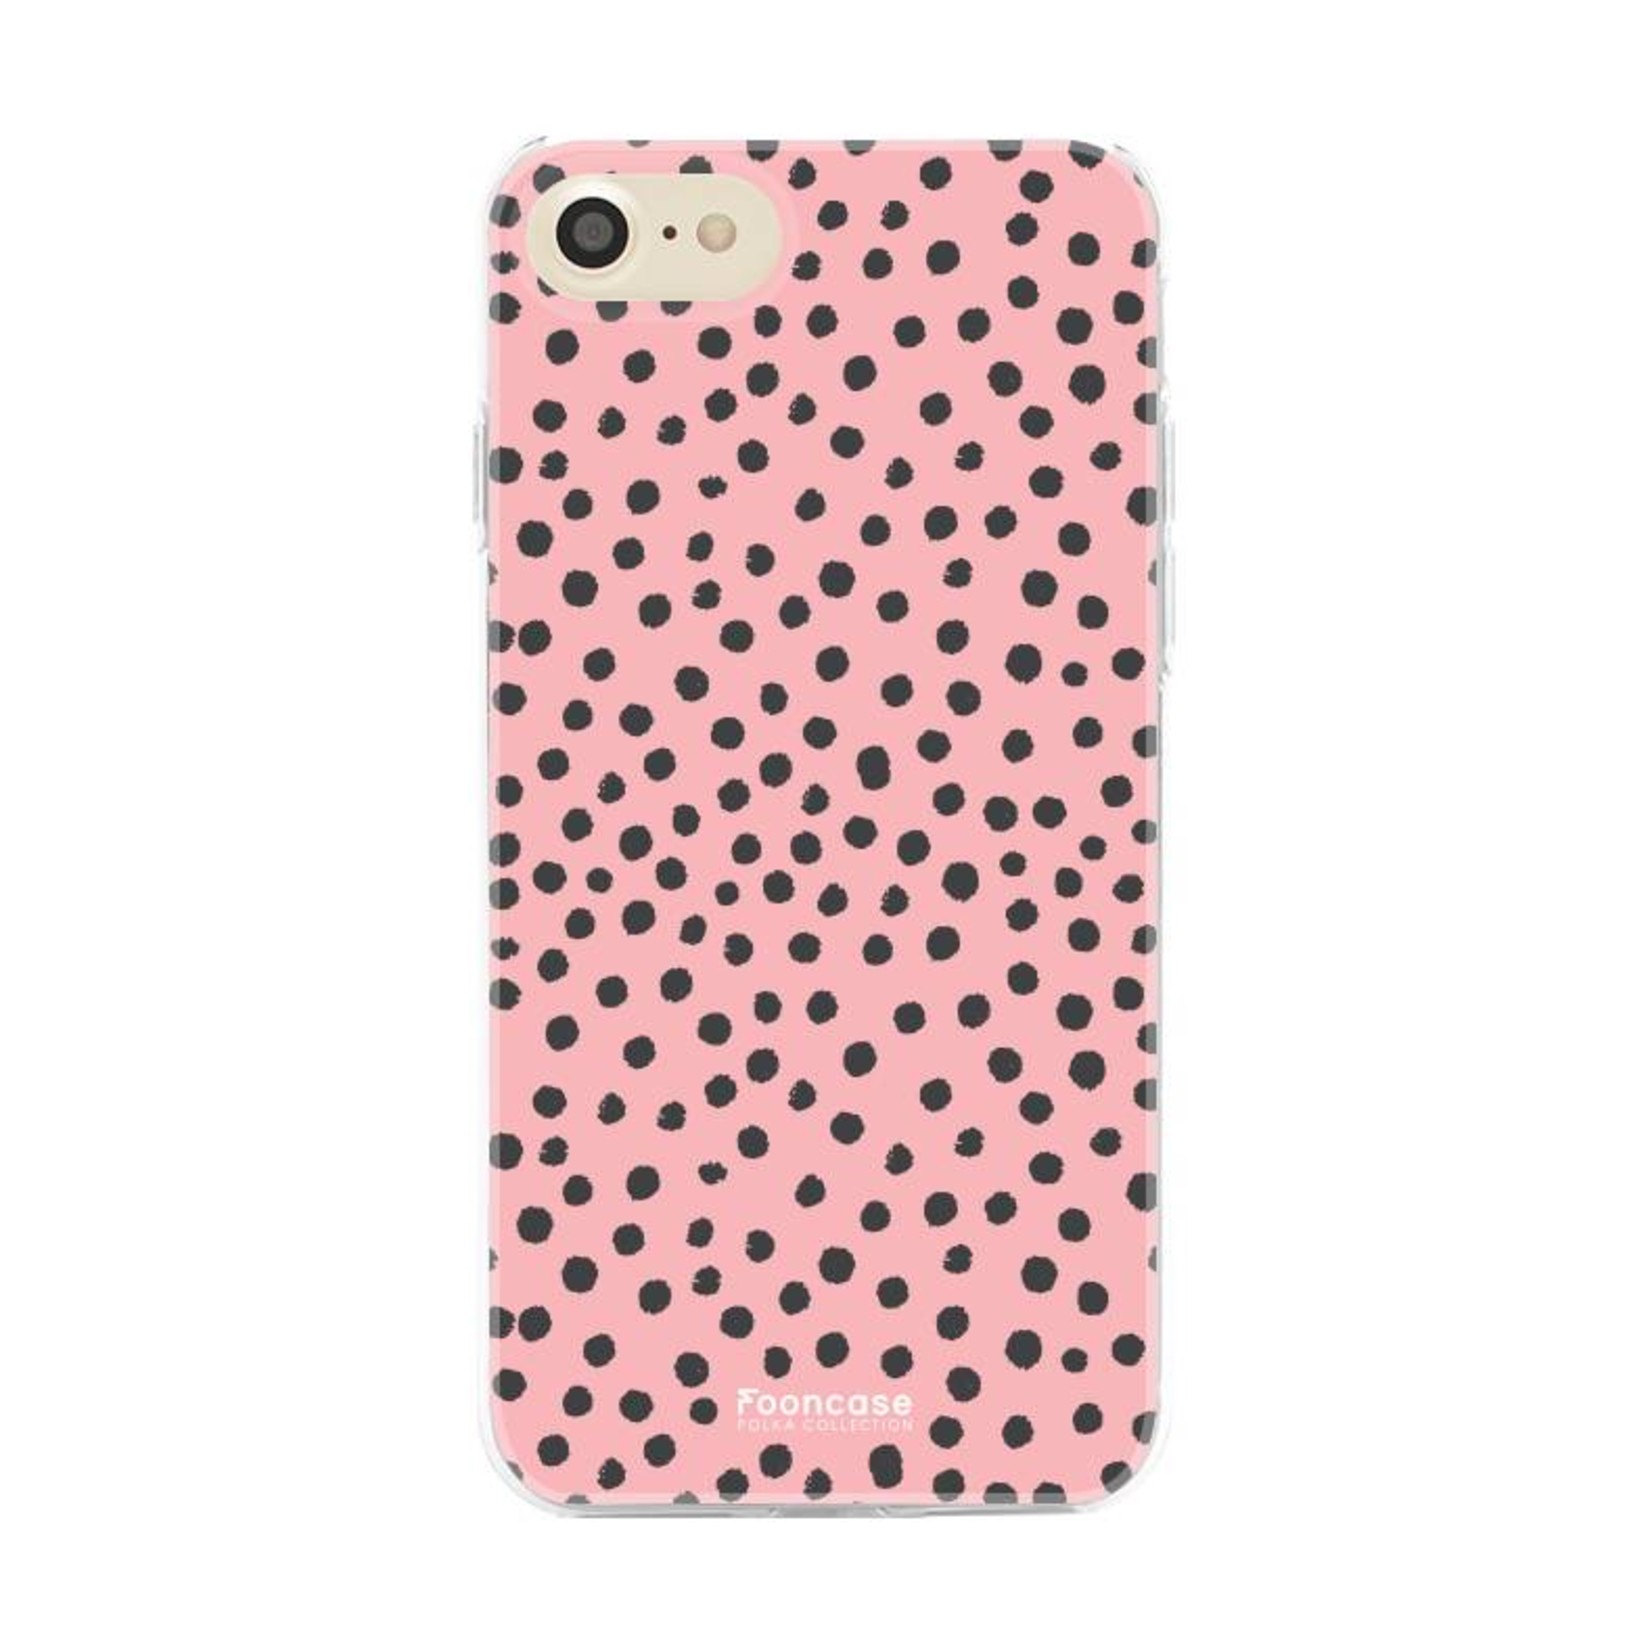 FOONCASE Iphone 7 - POLKA COLLECTION / Rosa